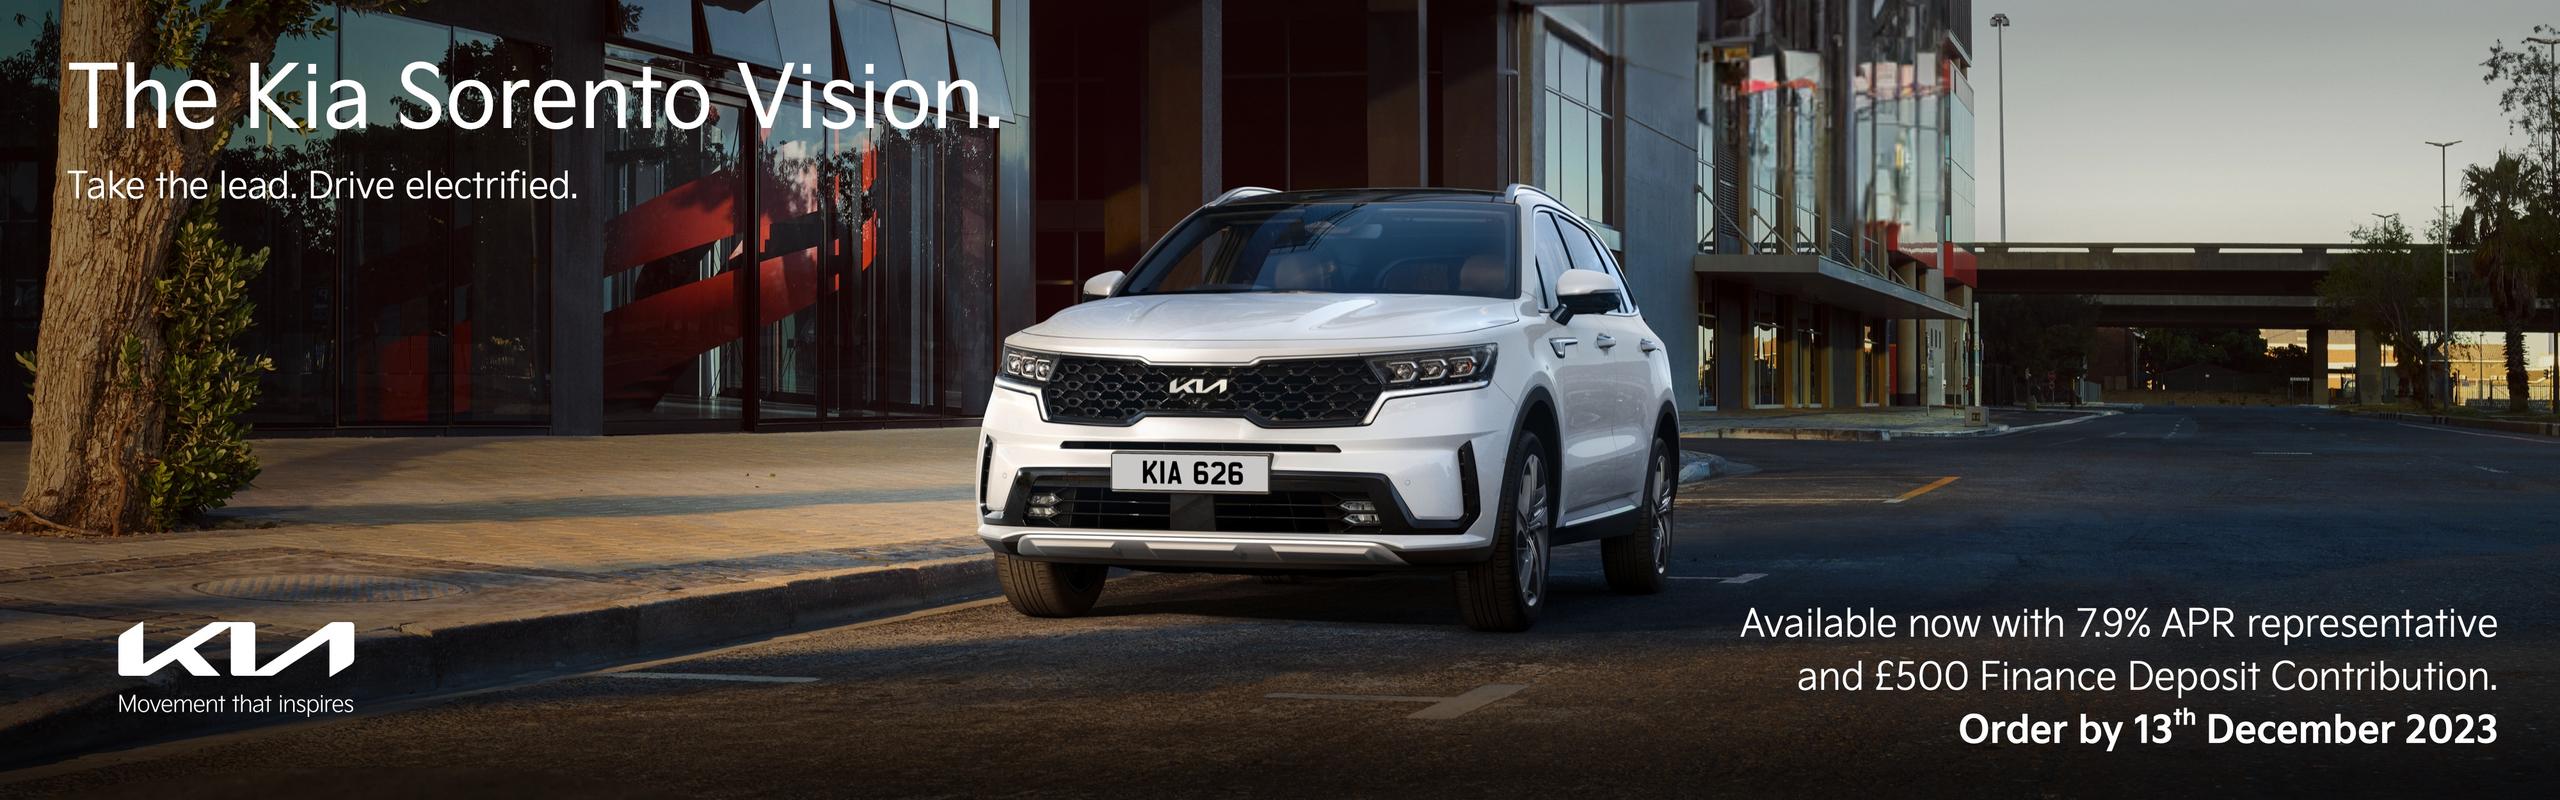 Sorento - Vision 7.9% APR. £500 deposit contribution. order by the 13th December 2023